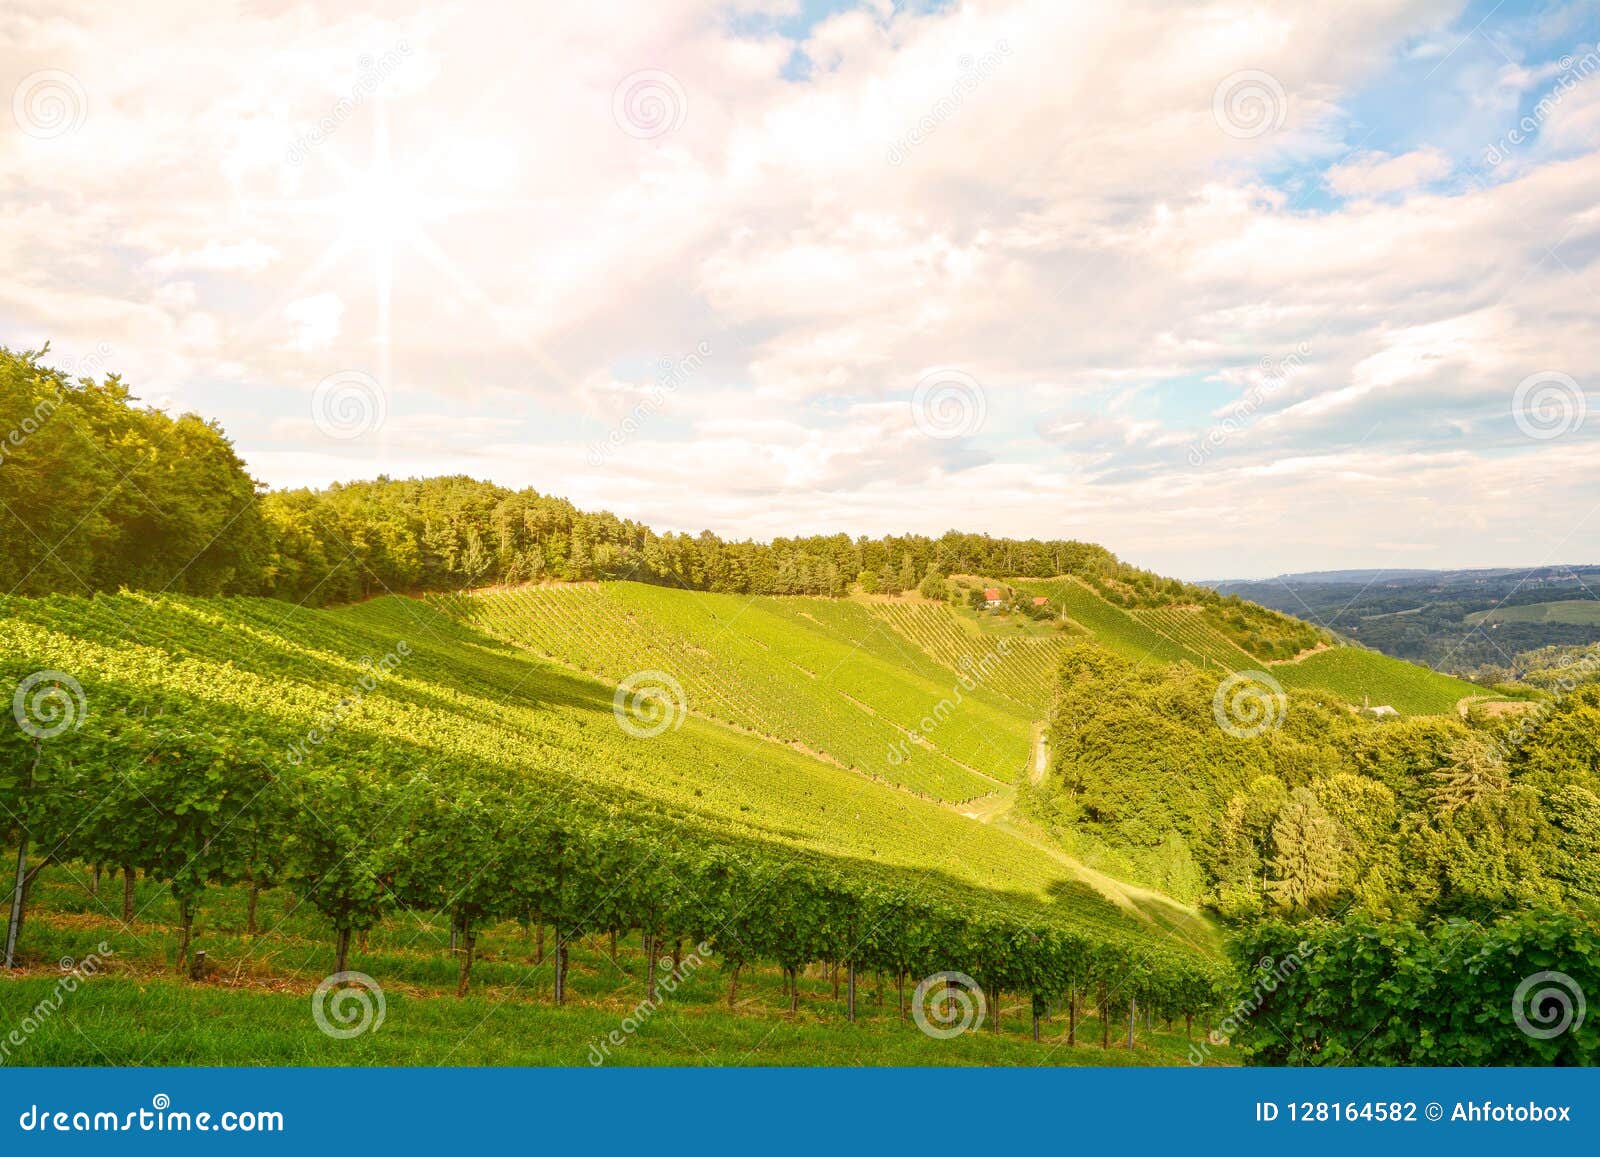 Sunset Over Vineyards With Red Wine Grapes In Late Summer Stock Photo